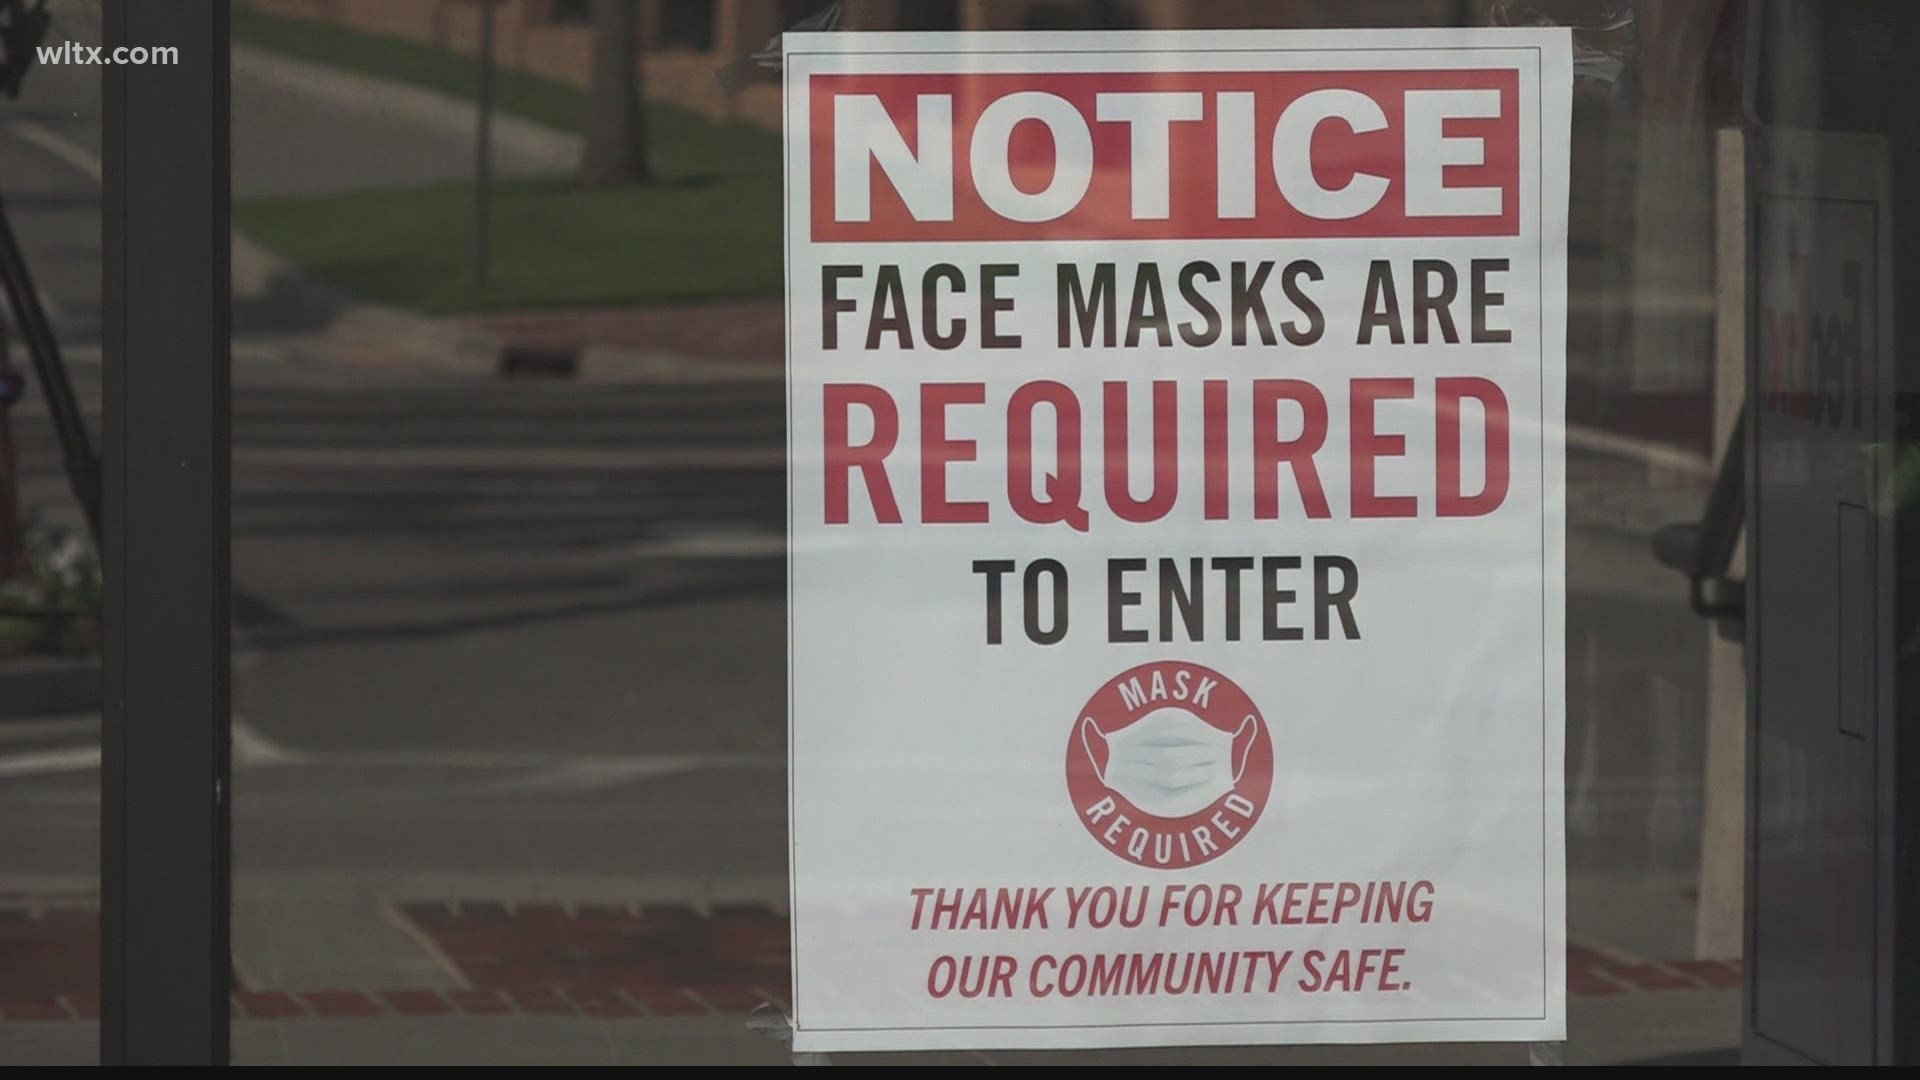 The new CDC guidelines suggest that people who are vaccinated should wear a mask in public places or when many people are present.